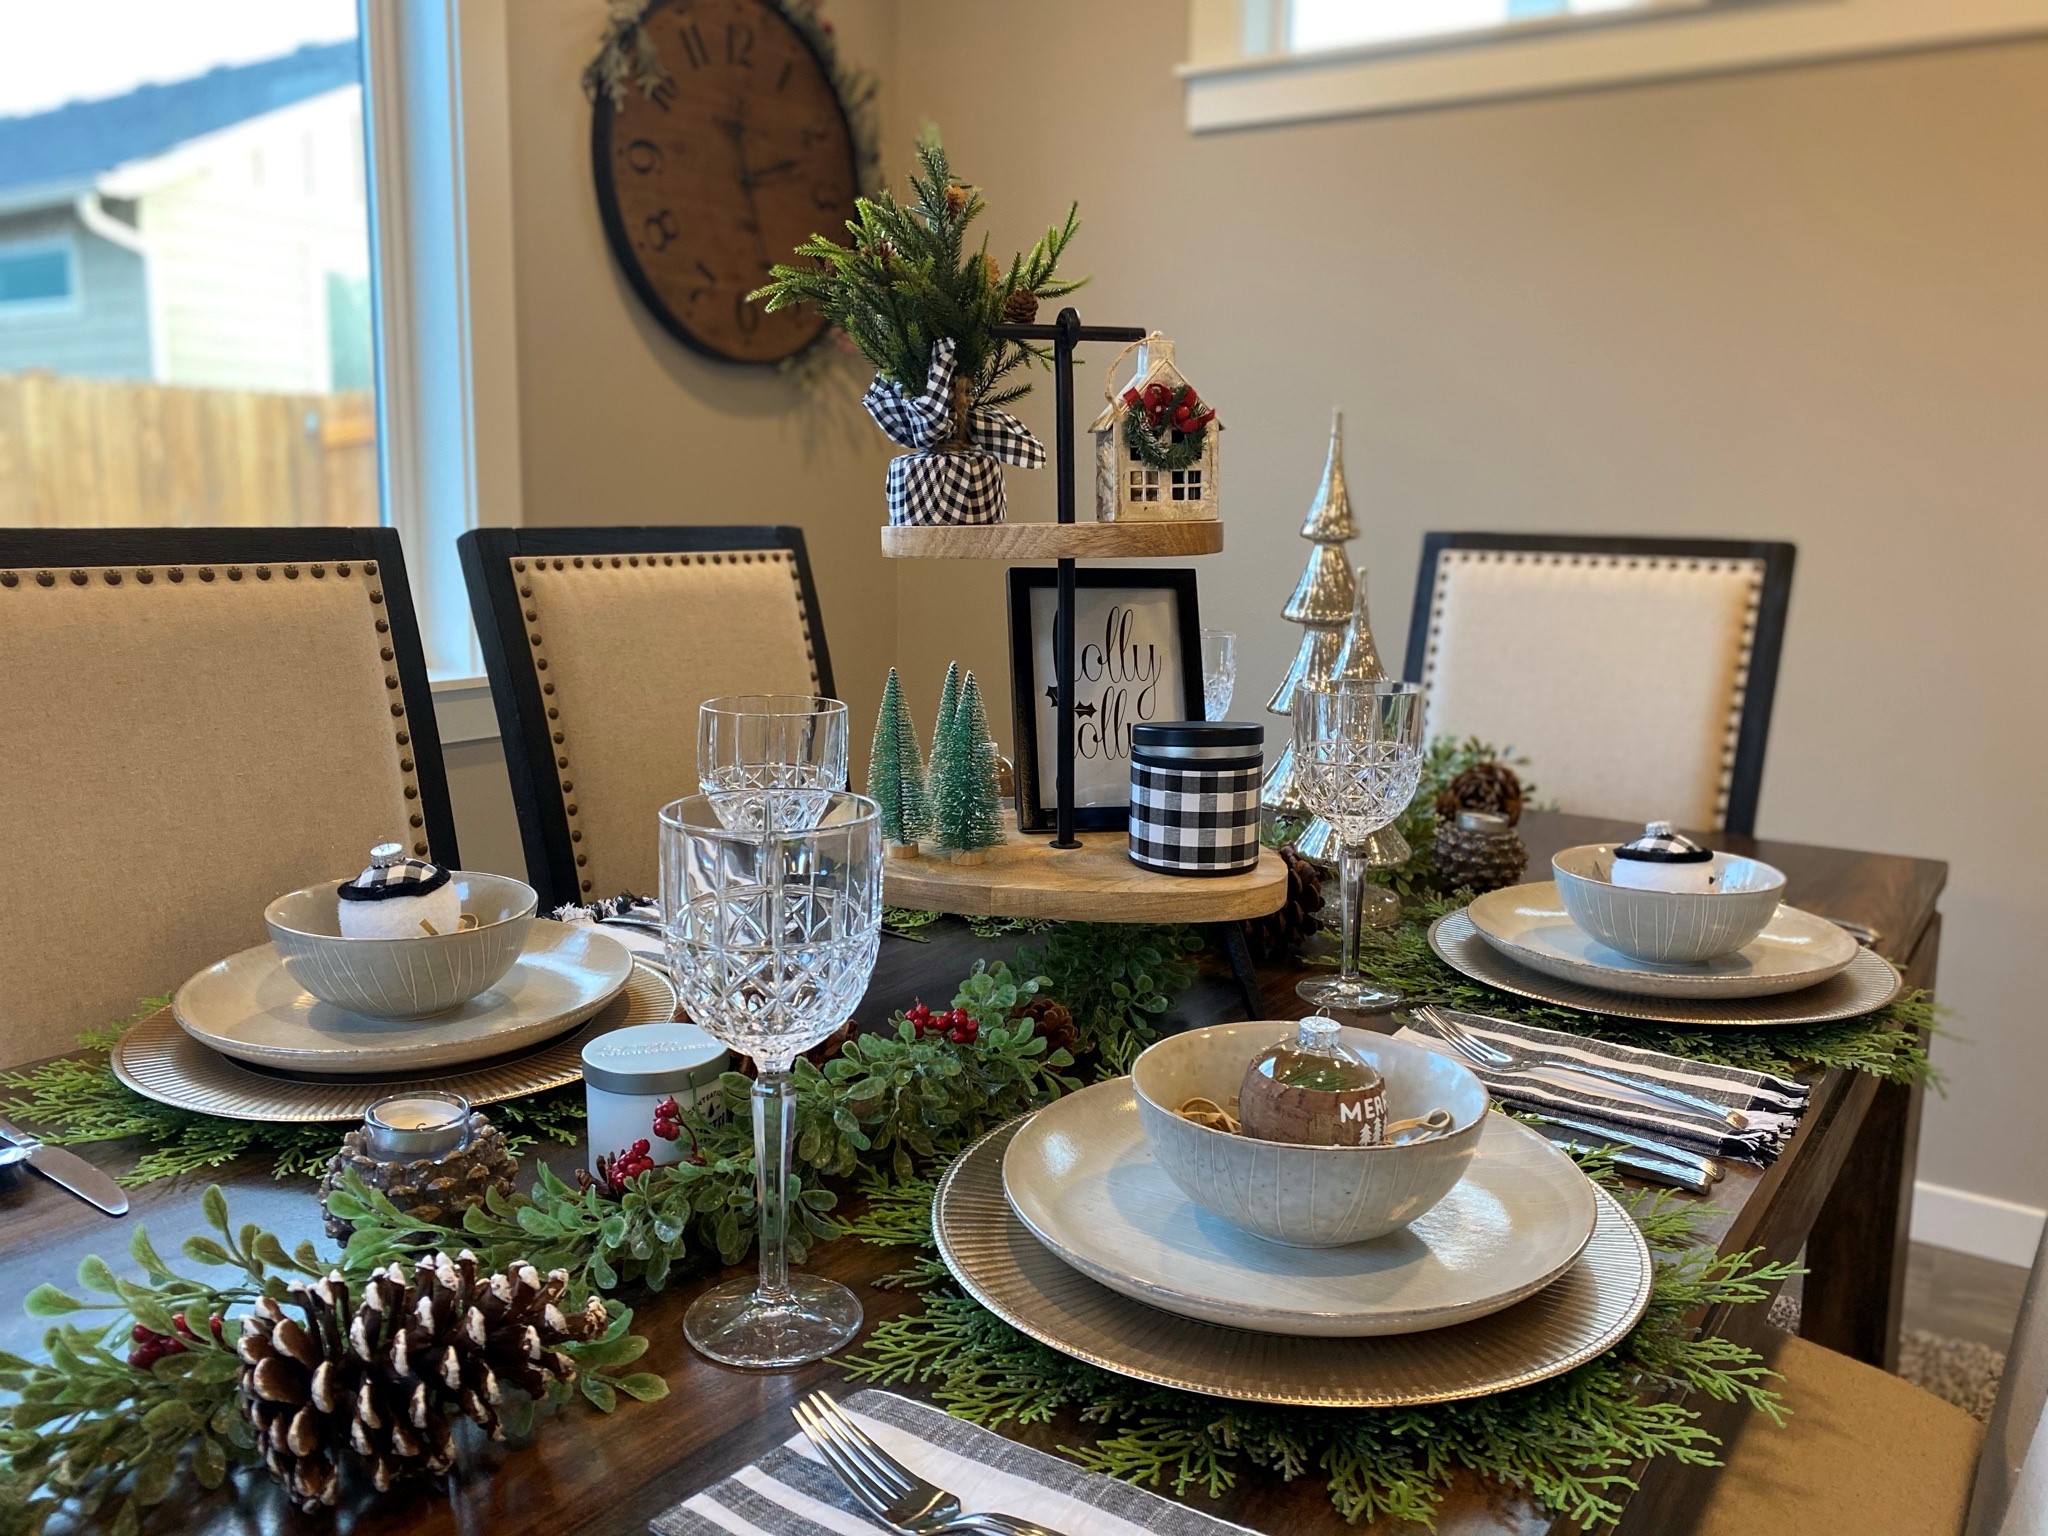 Simple Steps to Prepare Your Home for Holiday Entertaining